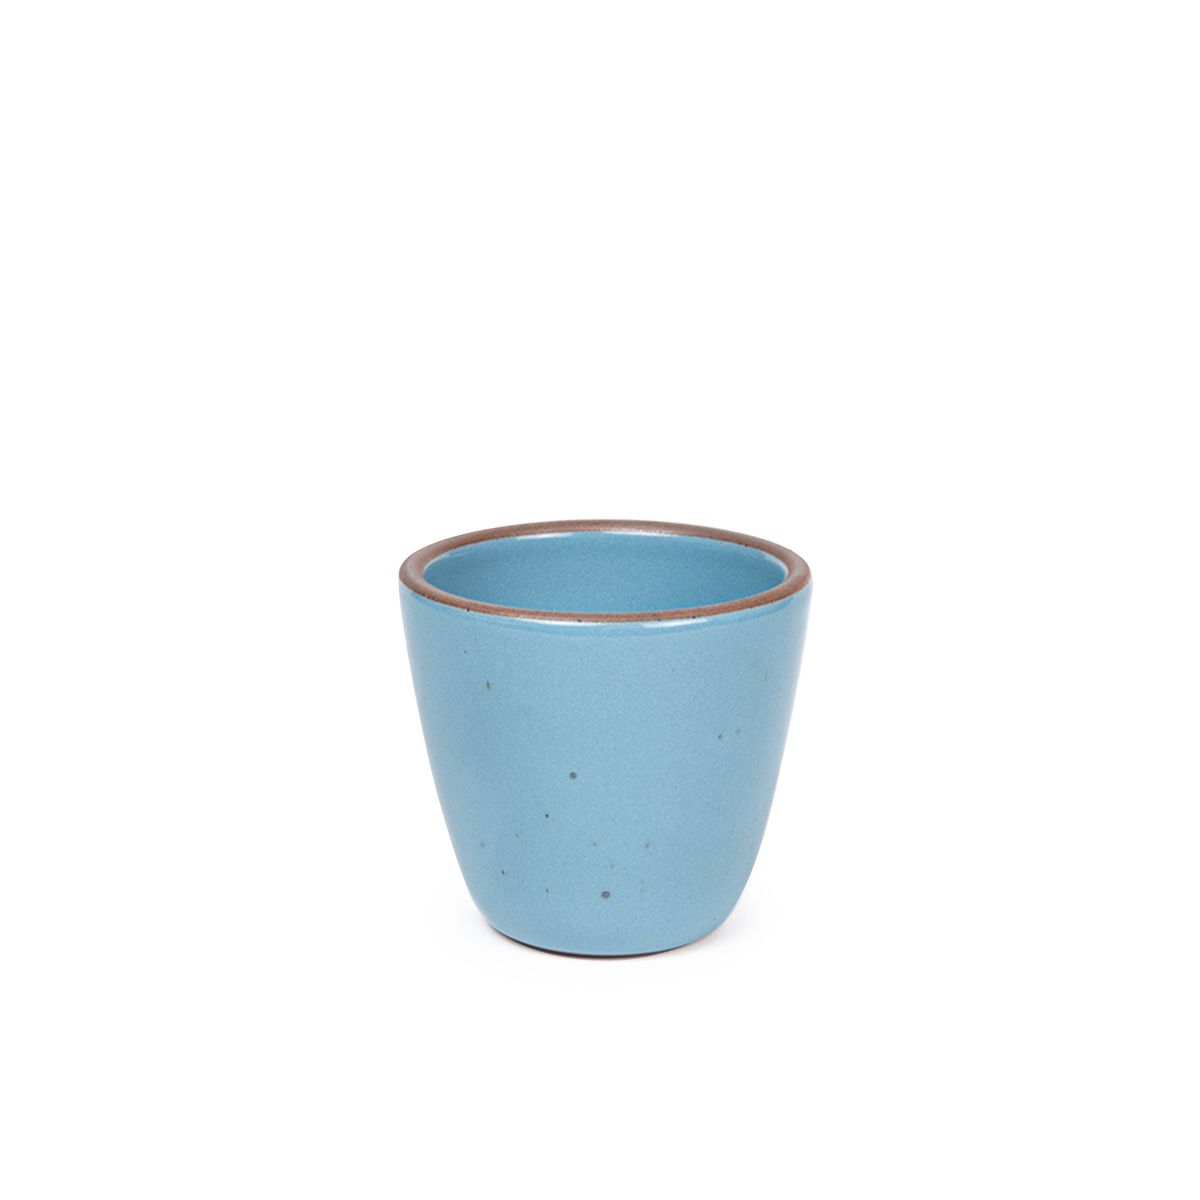 A short cup that tapers out to get wider at the top in a robin's egg blue color featuring iron speckles